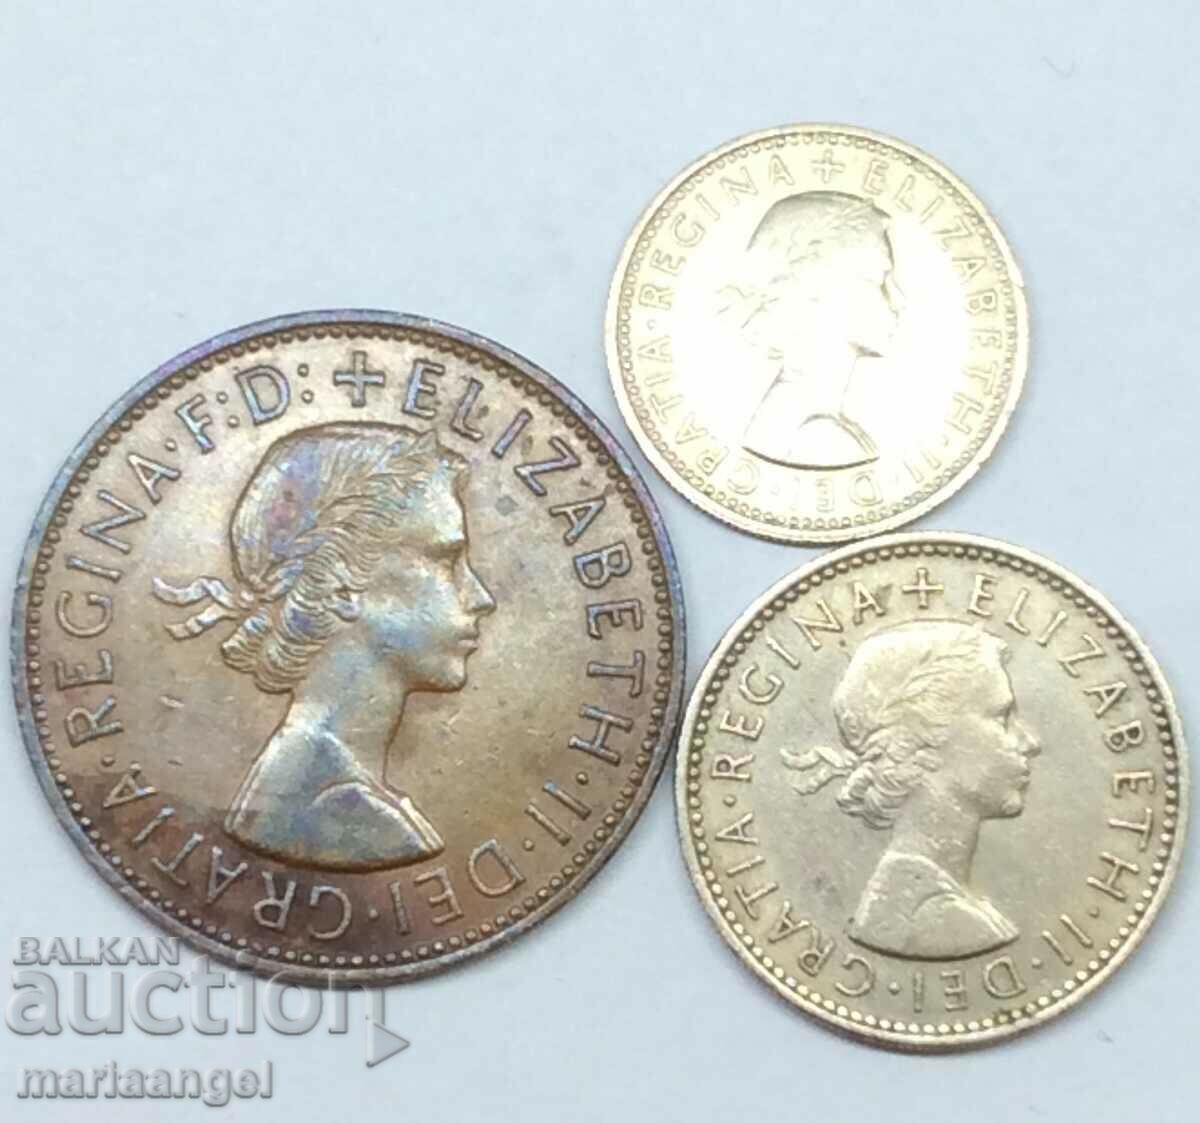 Set of 3 coins from England - Penny 1963, 6 pence 1965 Shilling 1954